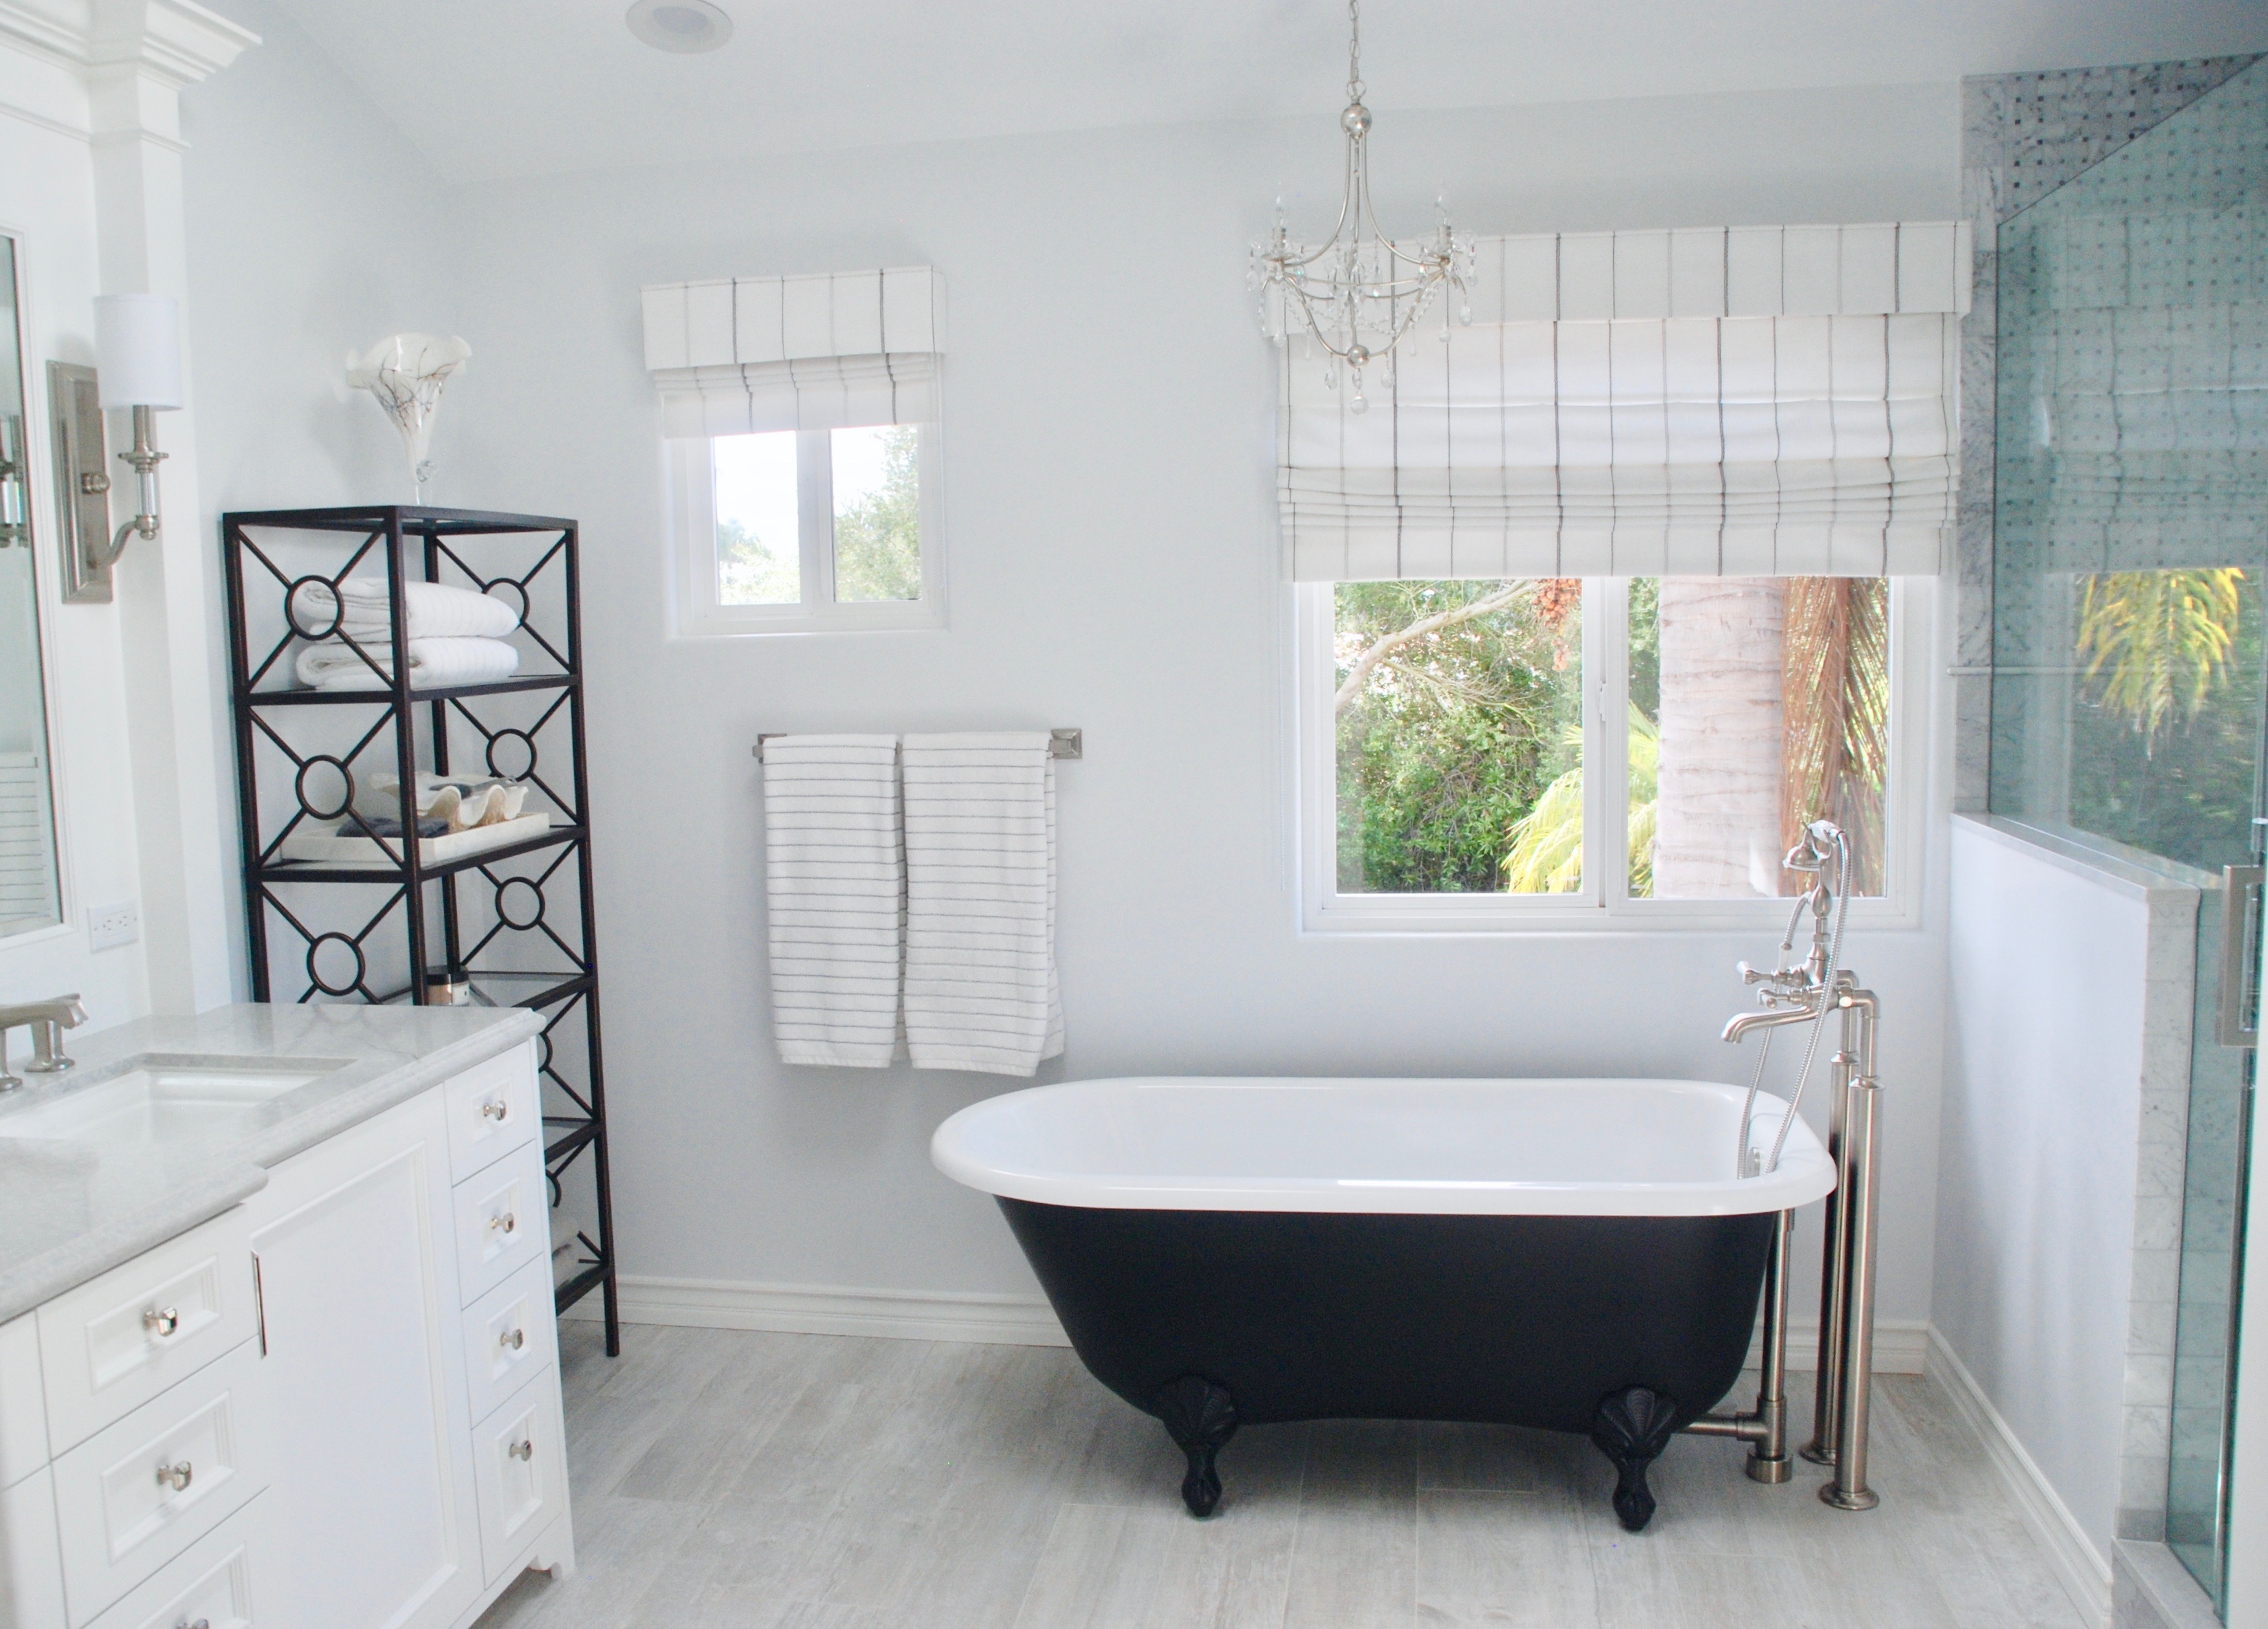 You are currently viewing Tranquil and Composed Bathroom using gentle shades of grey.